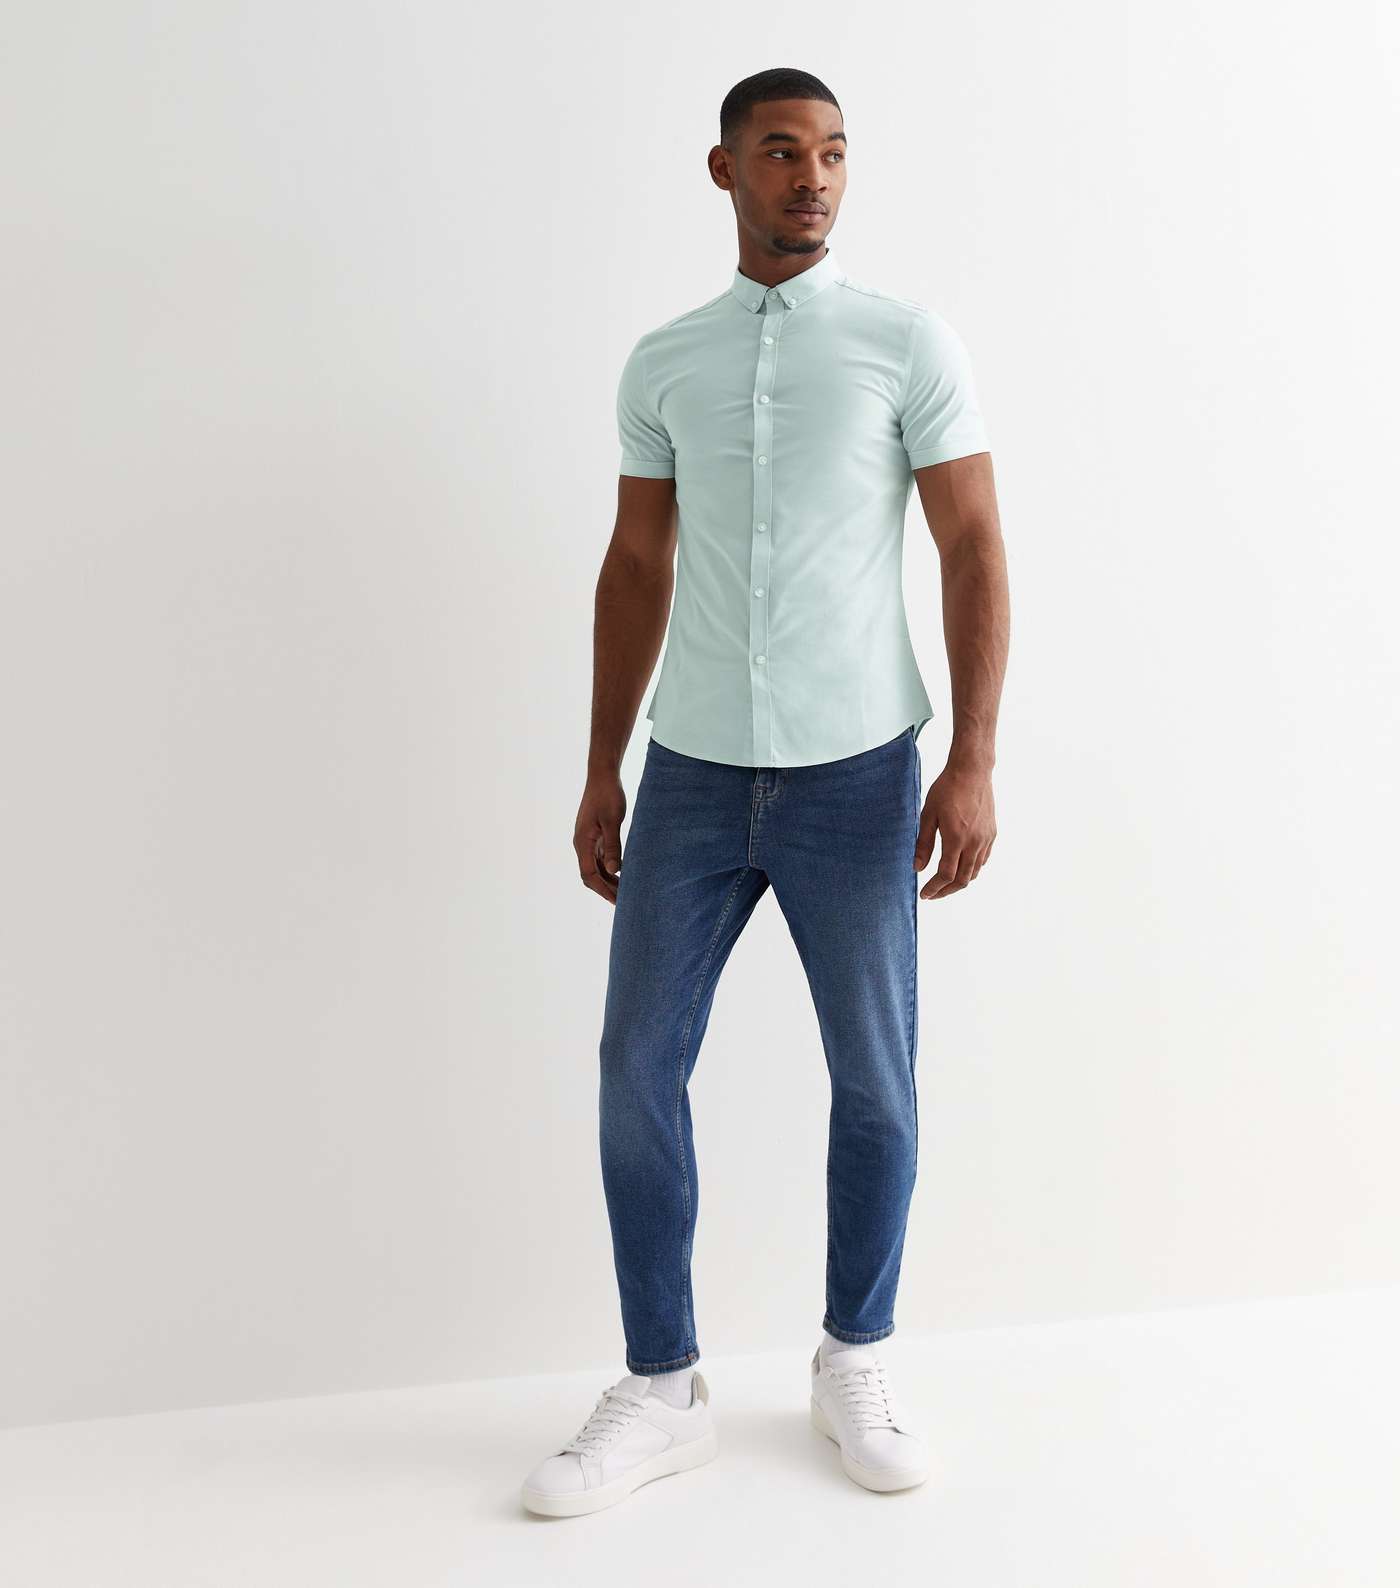 Pale Blue Short Sleeve Muscle Fit Oxford Shirt Image 3